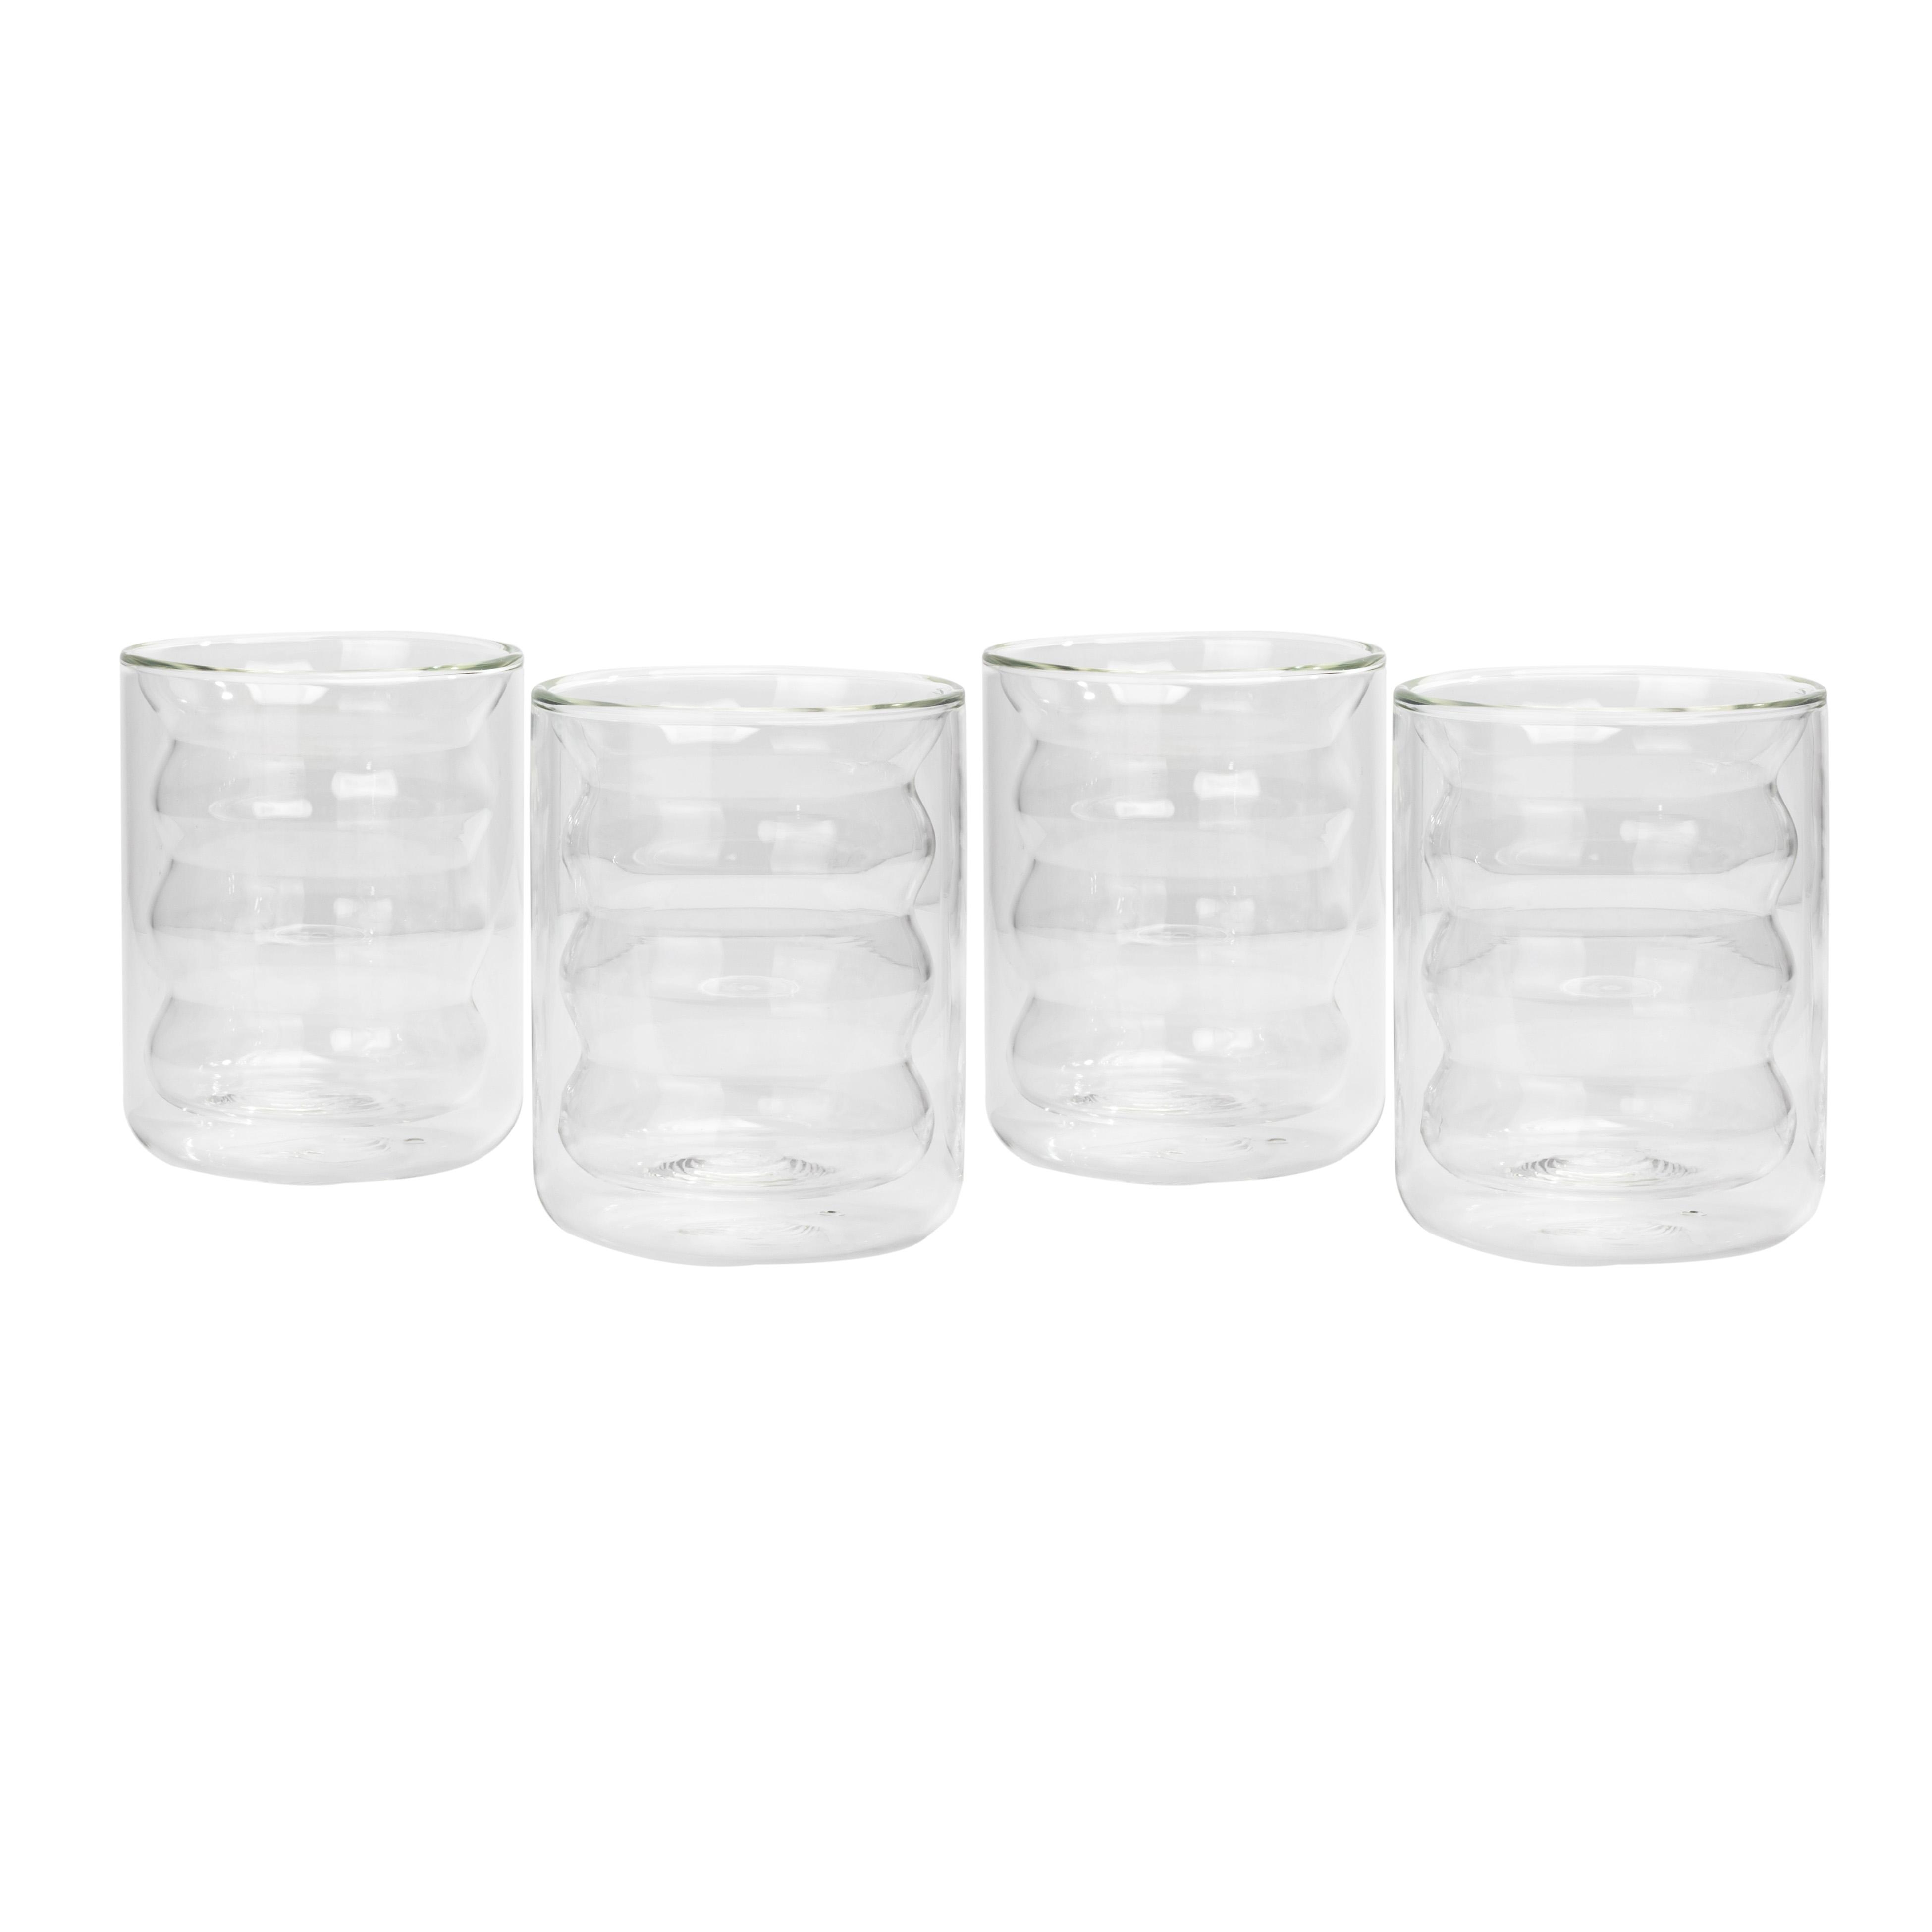 Waves Clear Water Glass - Set of 4 - Image 3